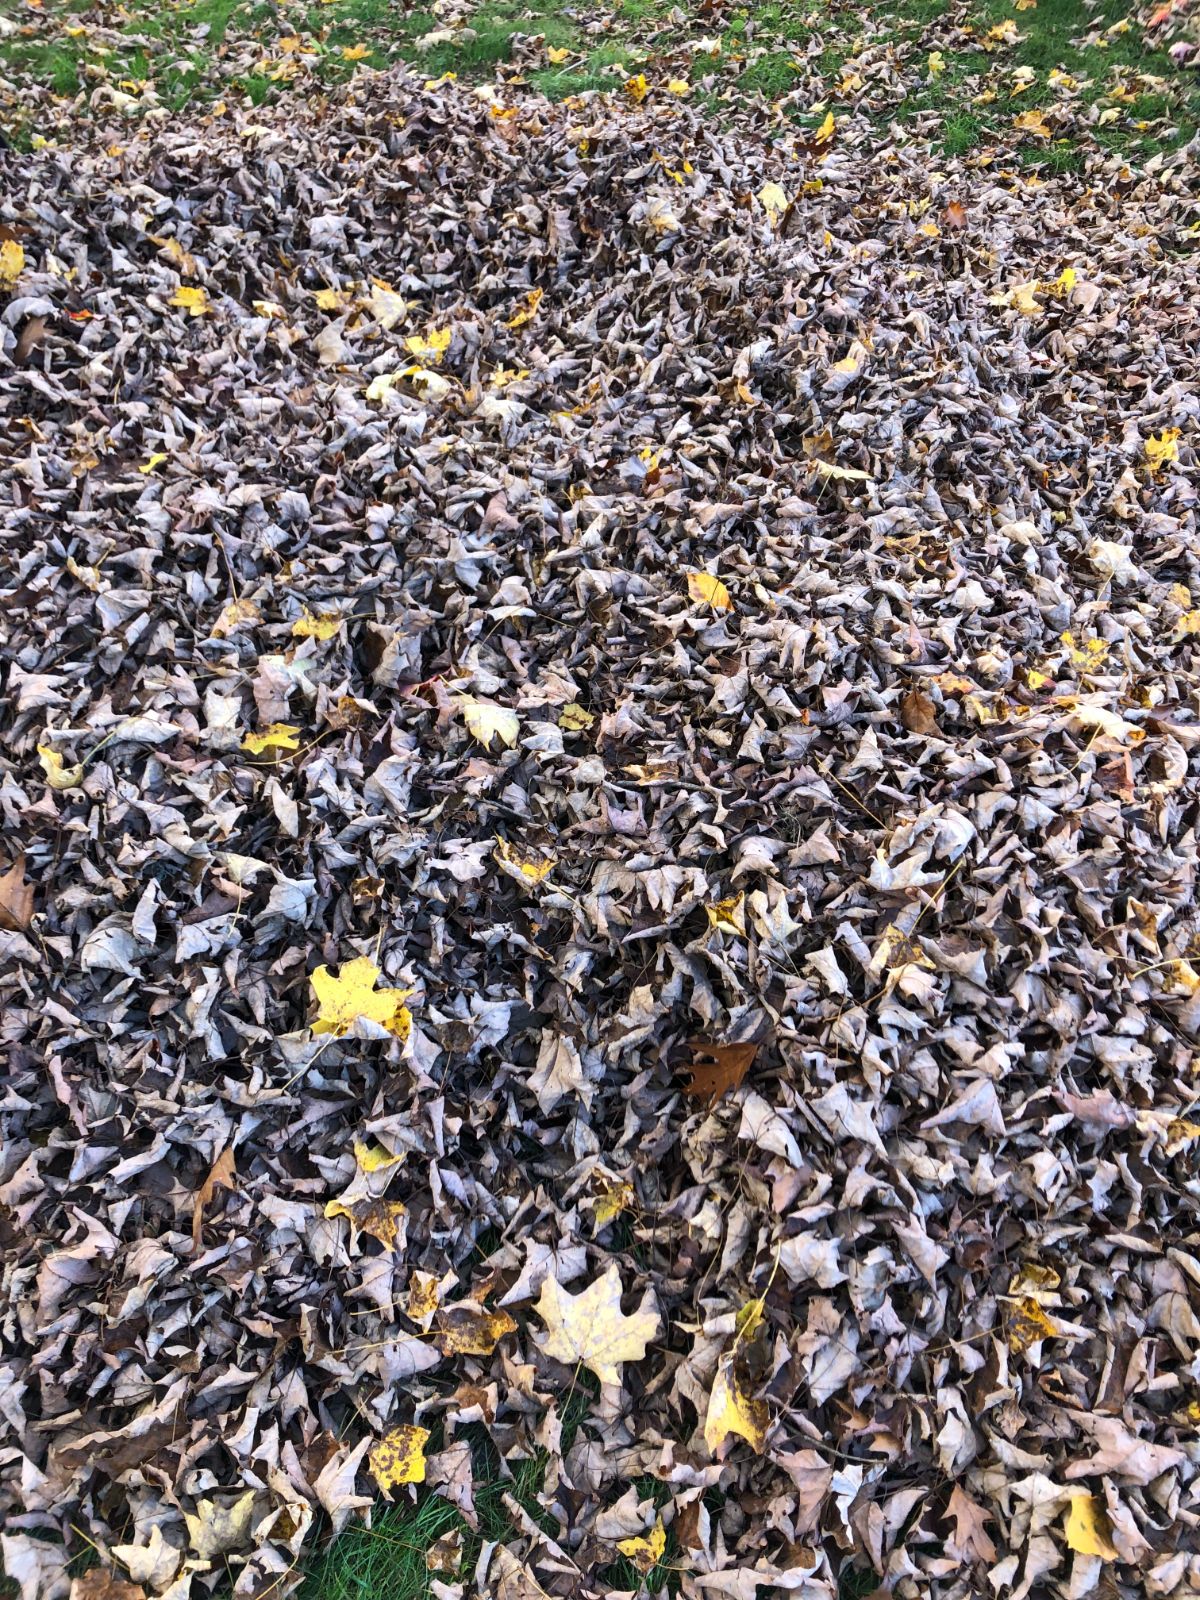 Autumn leaves to use for winter mulch